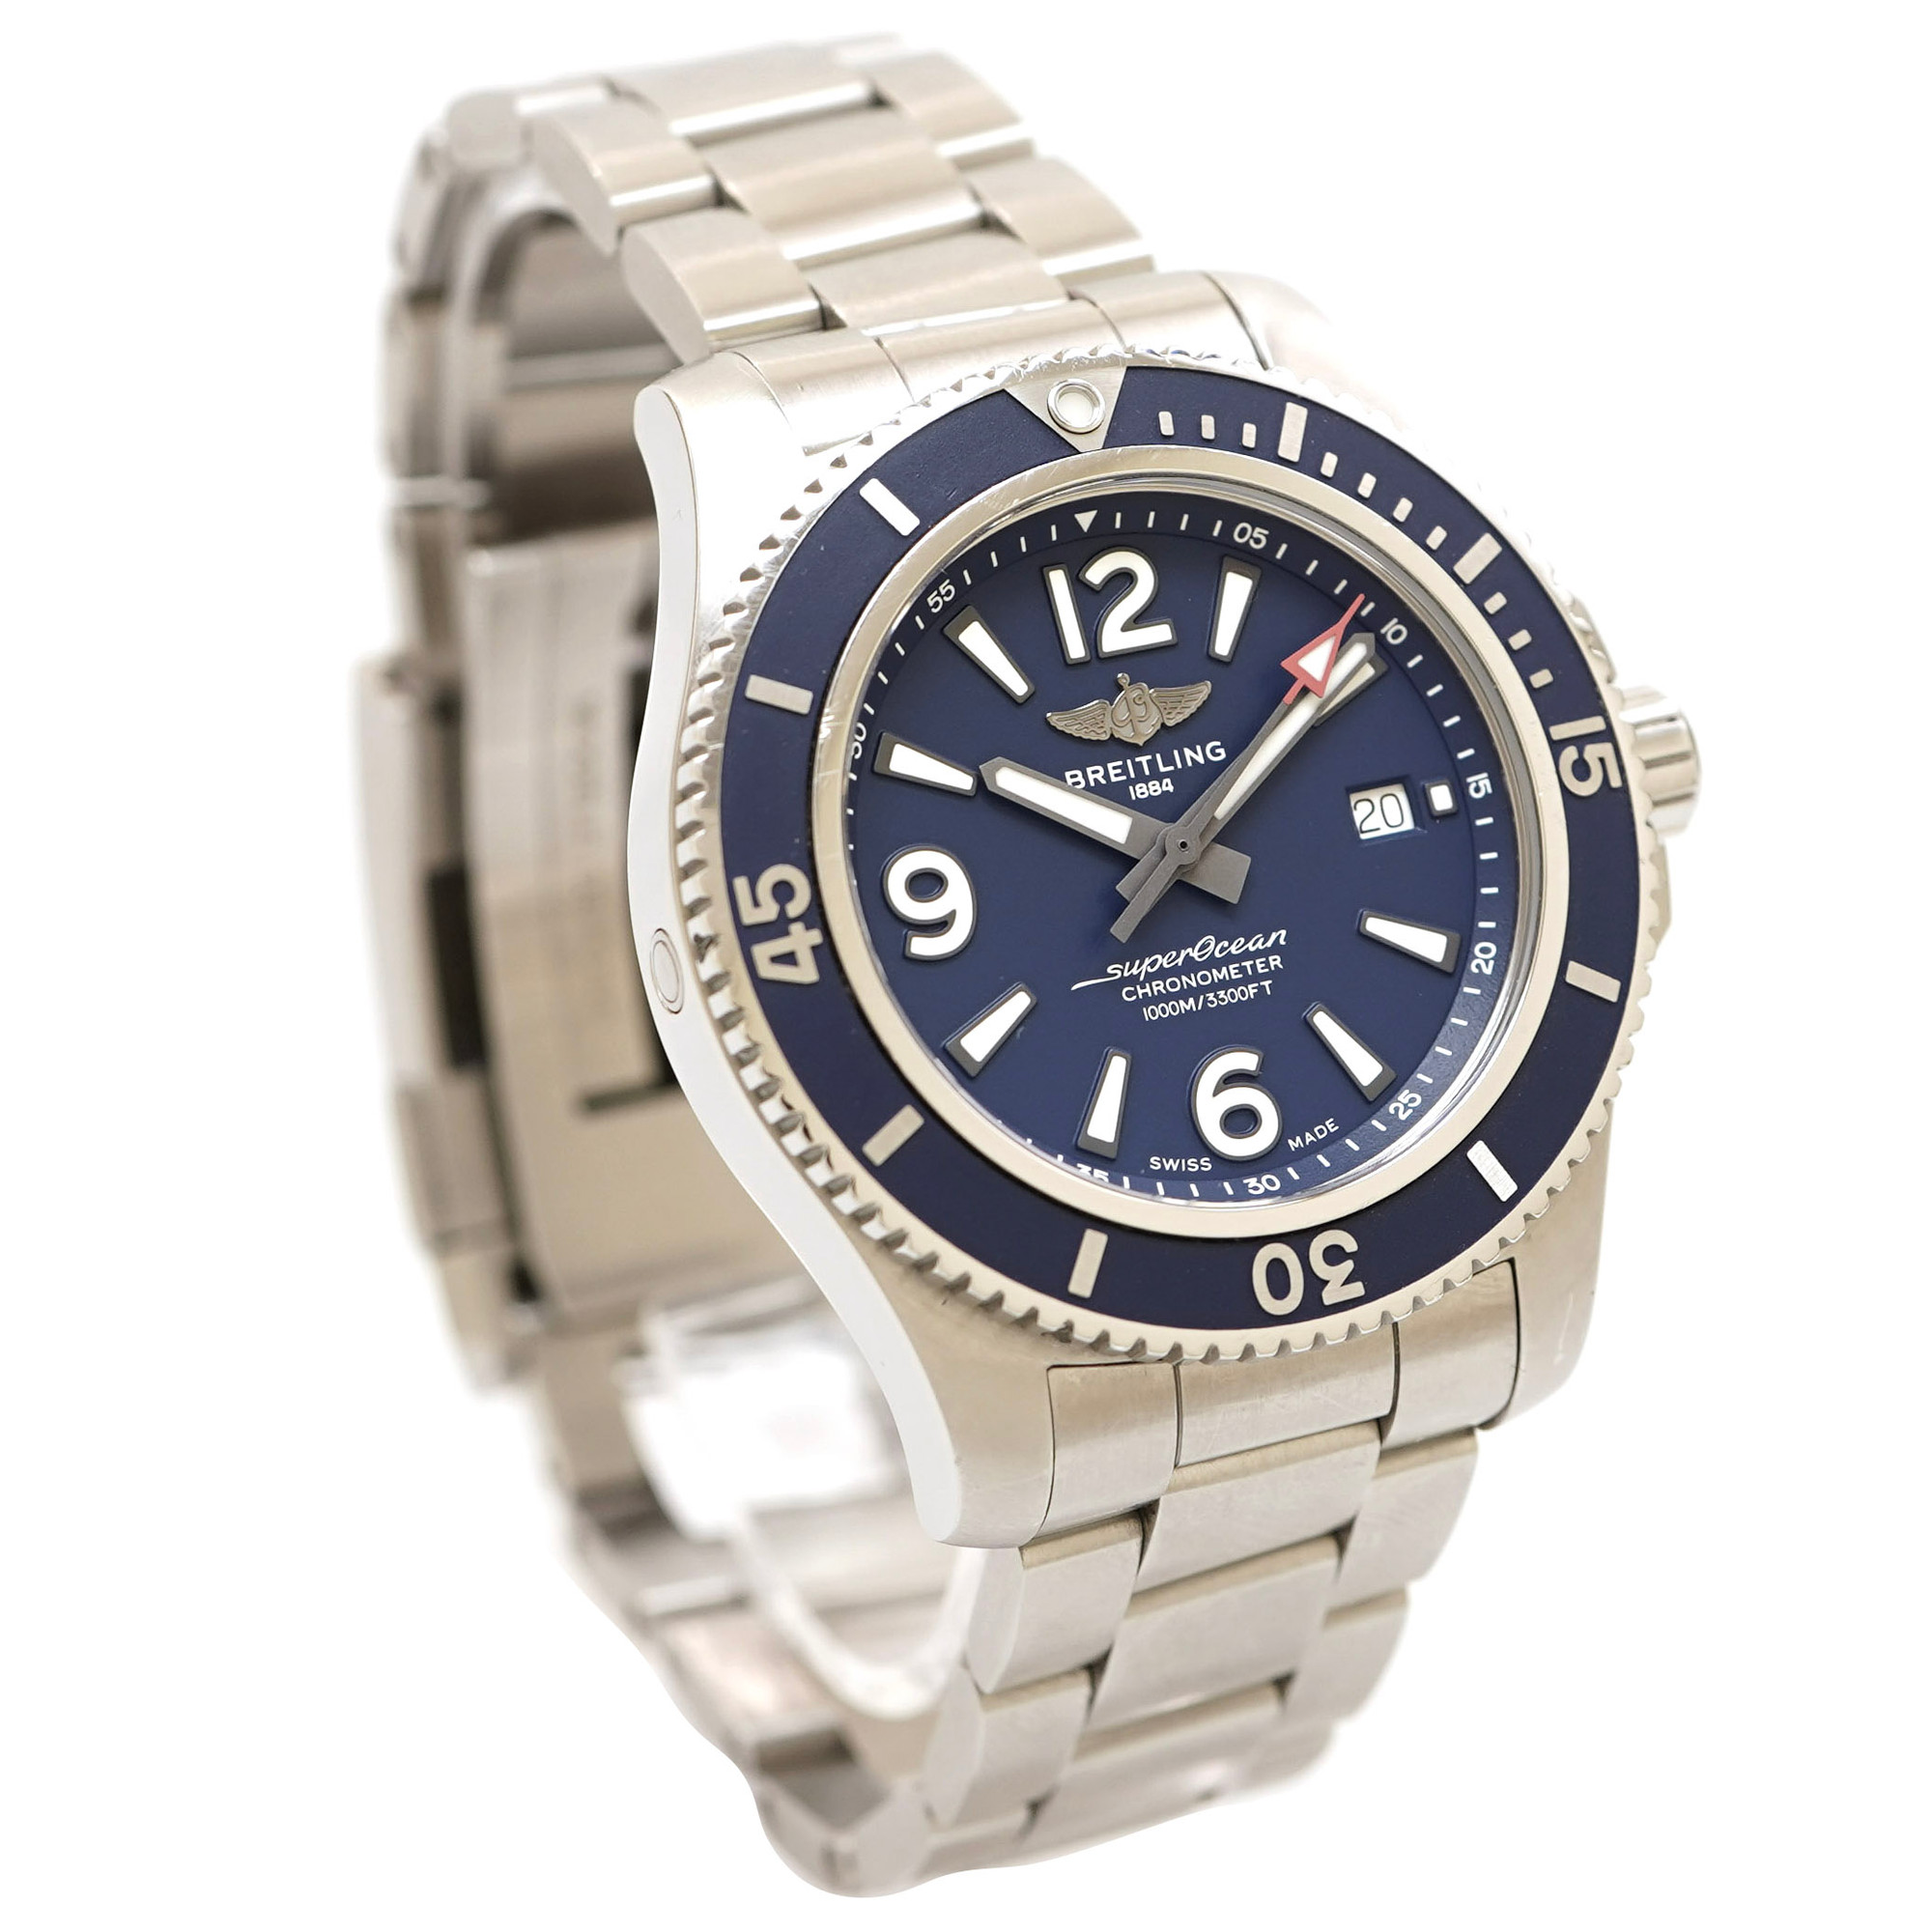 Breitling SuperOcean II Automatic 44mm A17367 - Inventory 3475